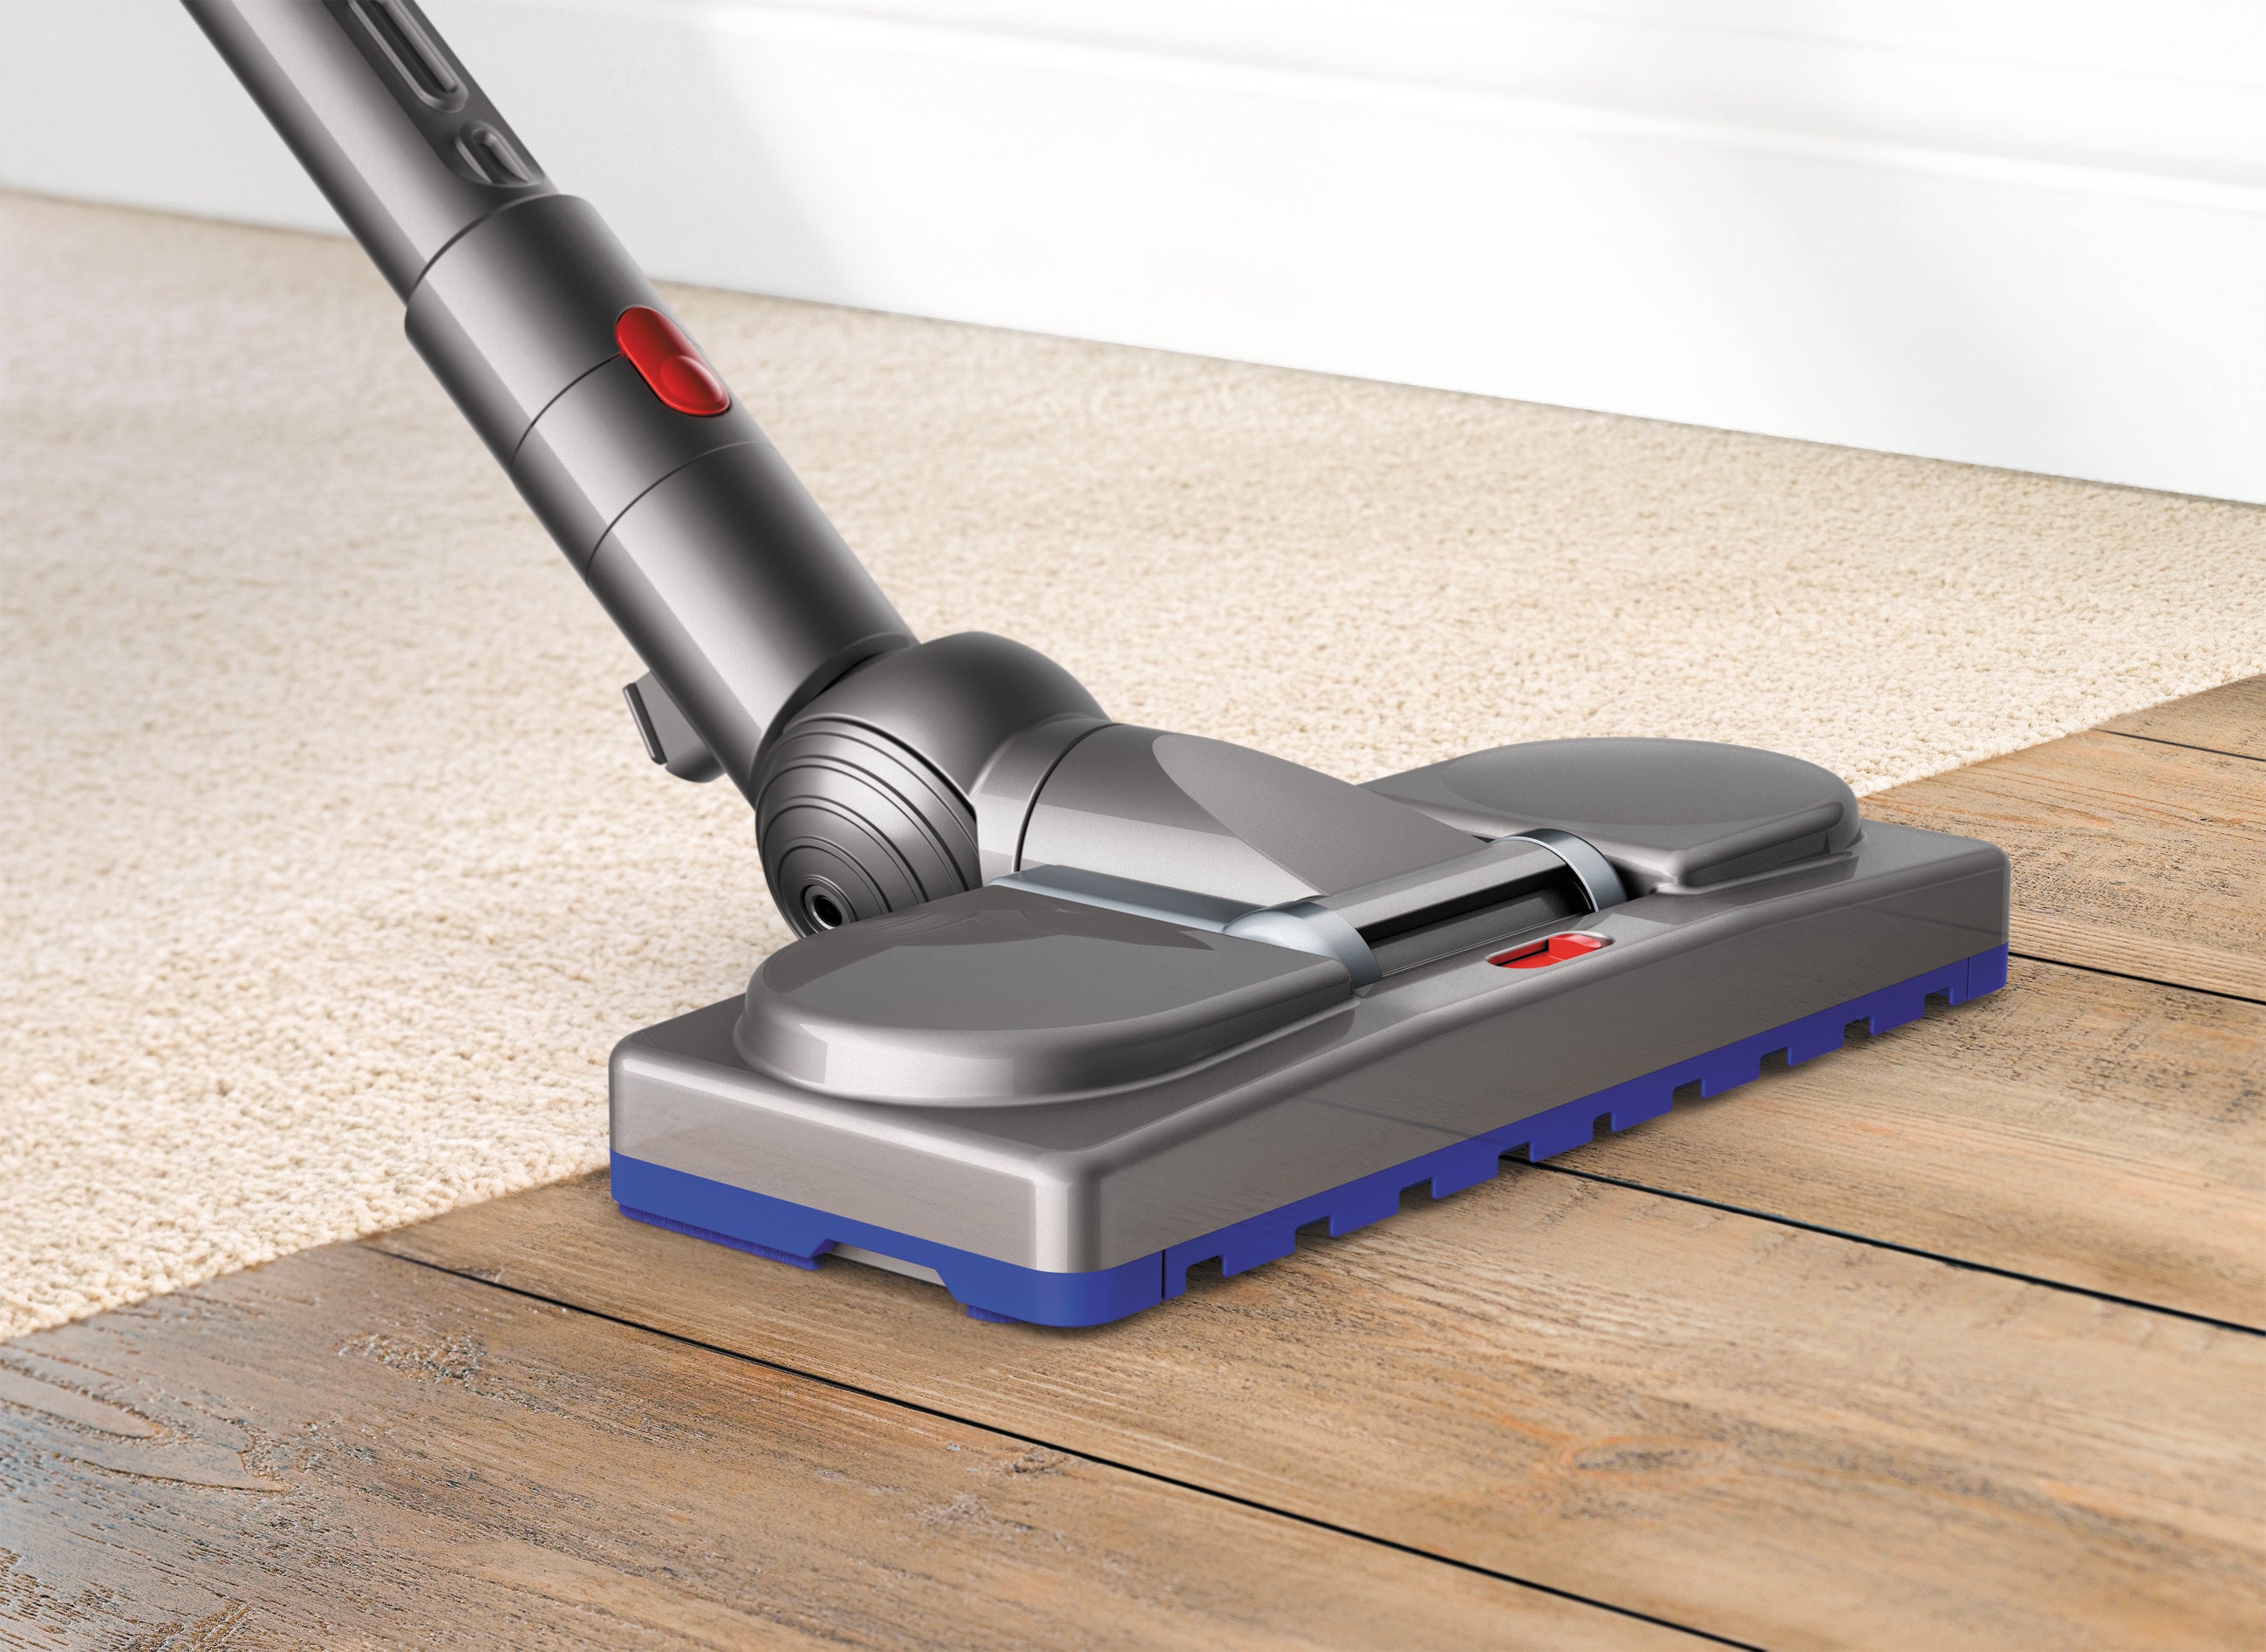 Crust Tub Restraint Dyson's Cinetic Big Ball vacuum can't be knocked over | Expert Reviews